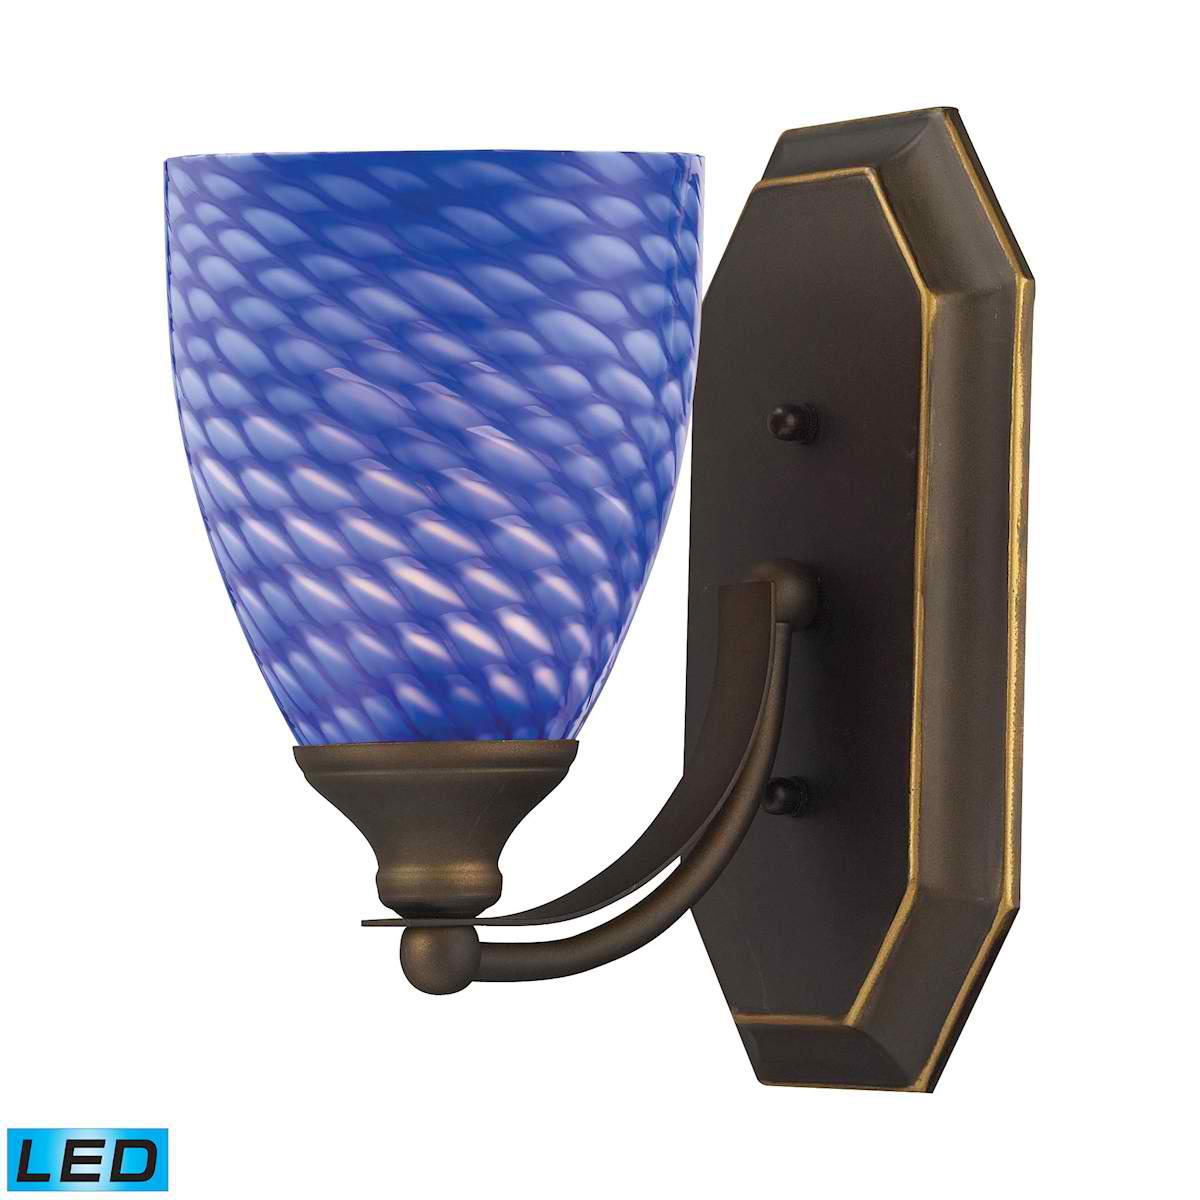 1 Light Vanity in Aged Bronze and Sapphire Glass - LED Offering Up To 800 Lumens (60 Watt Equivalent)